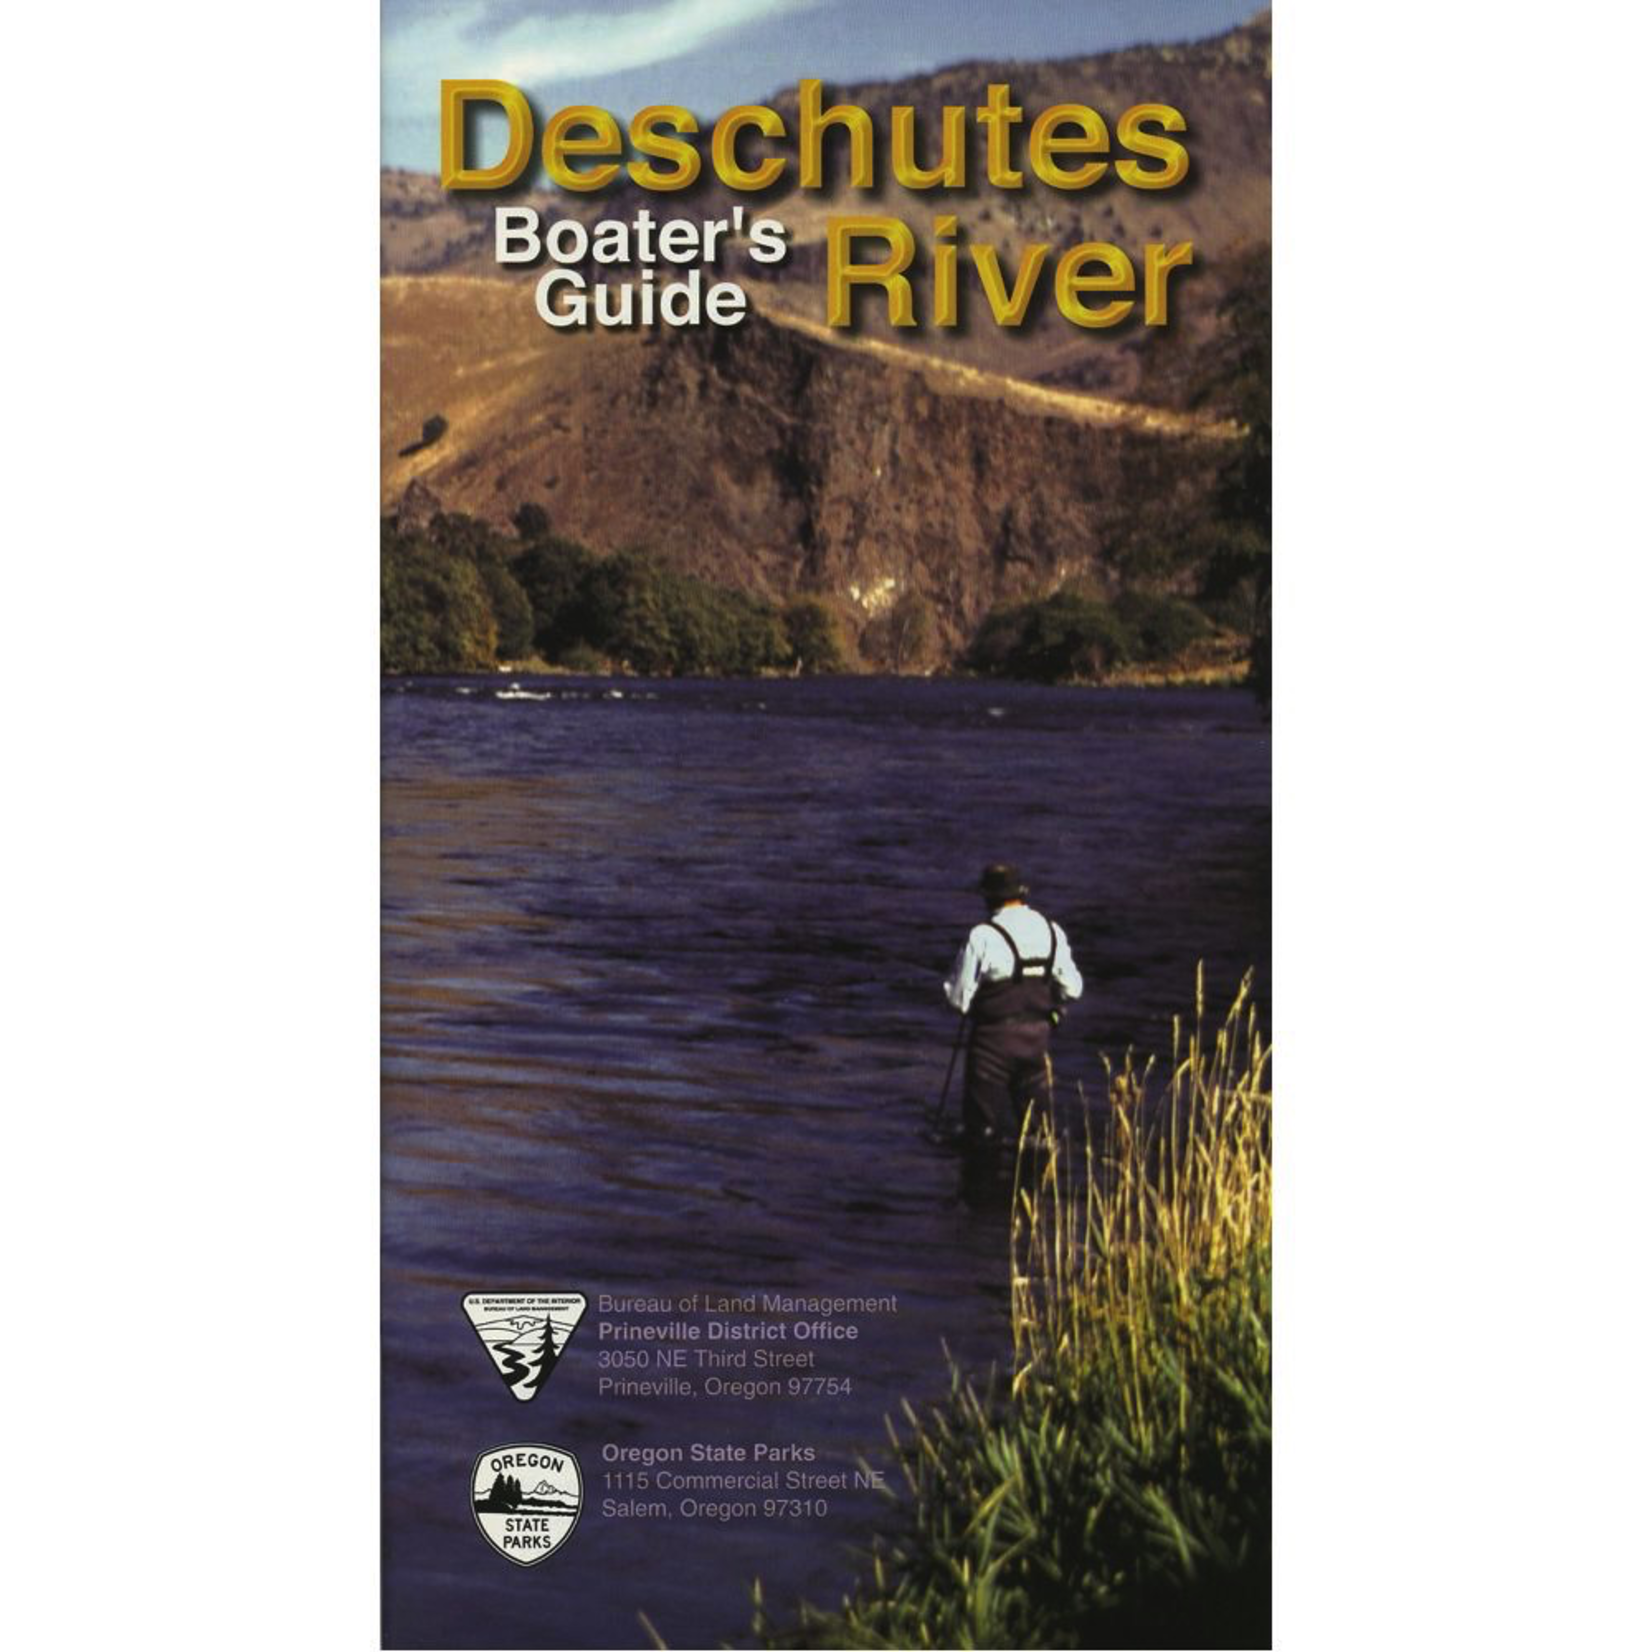 Deschutes River Boater’s Guide